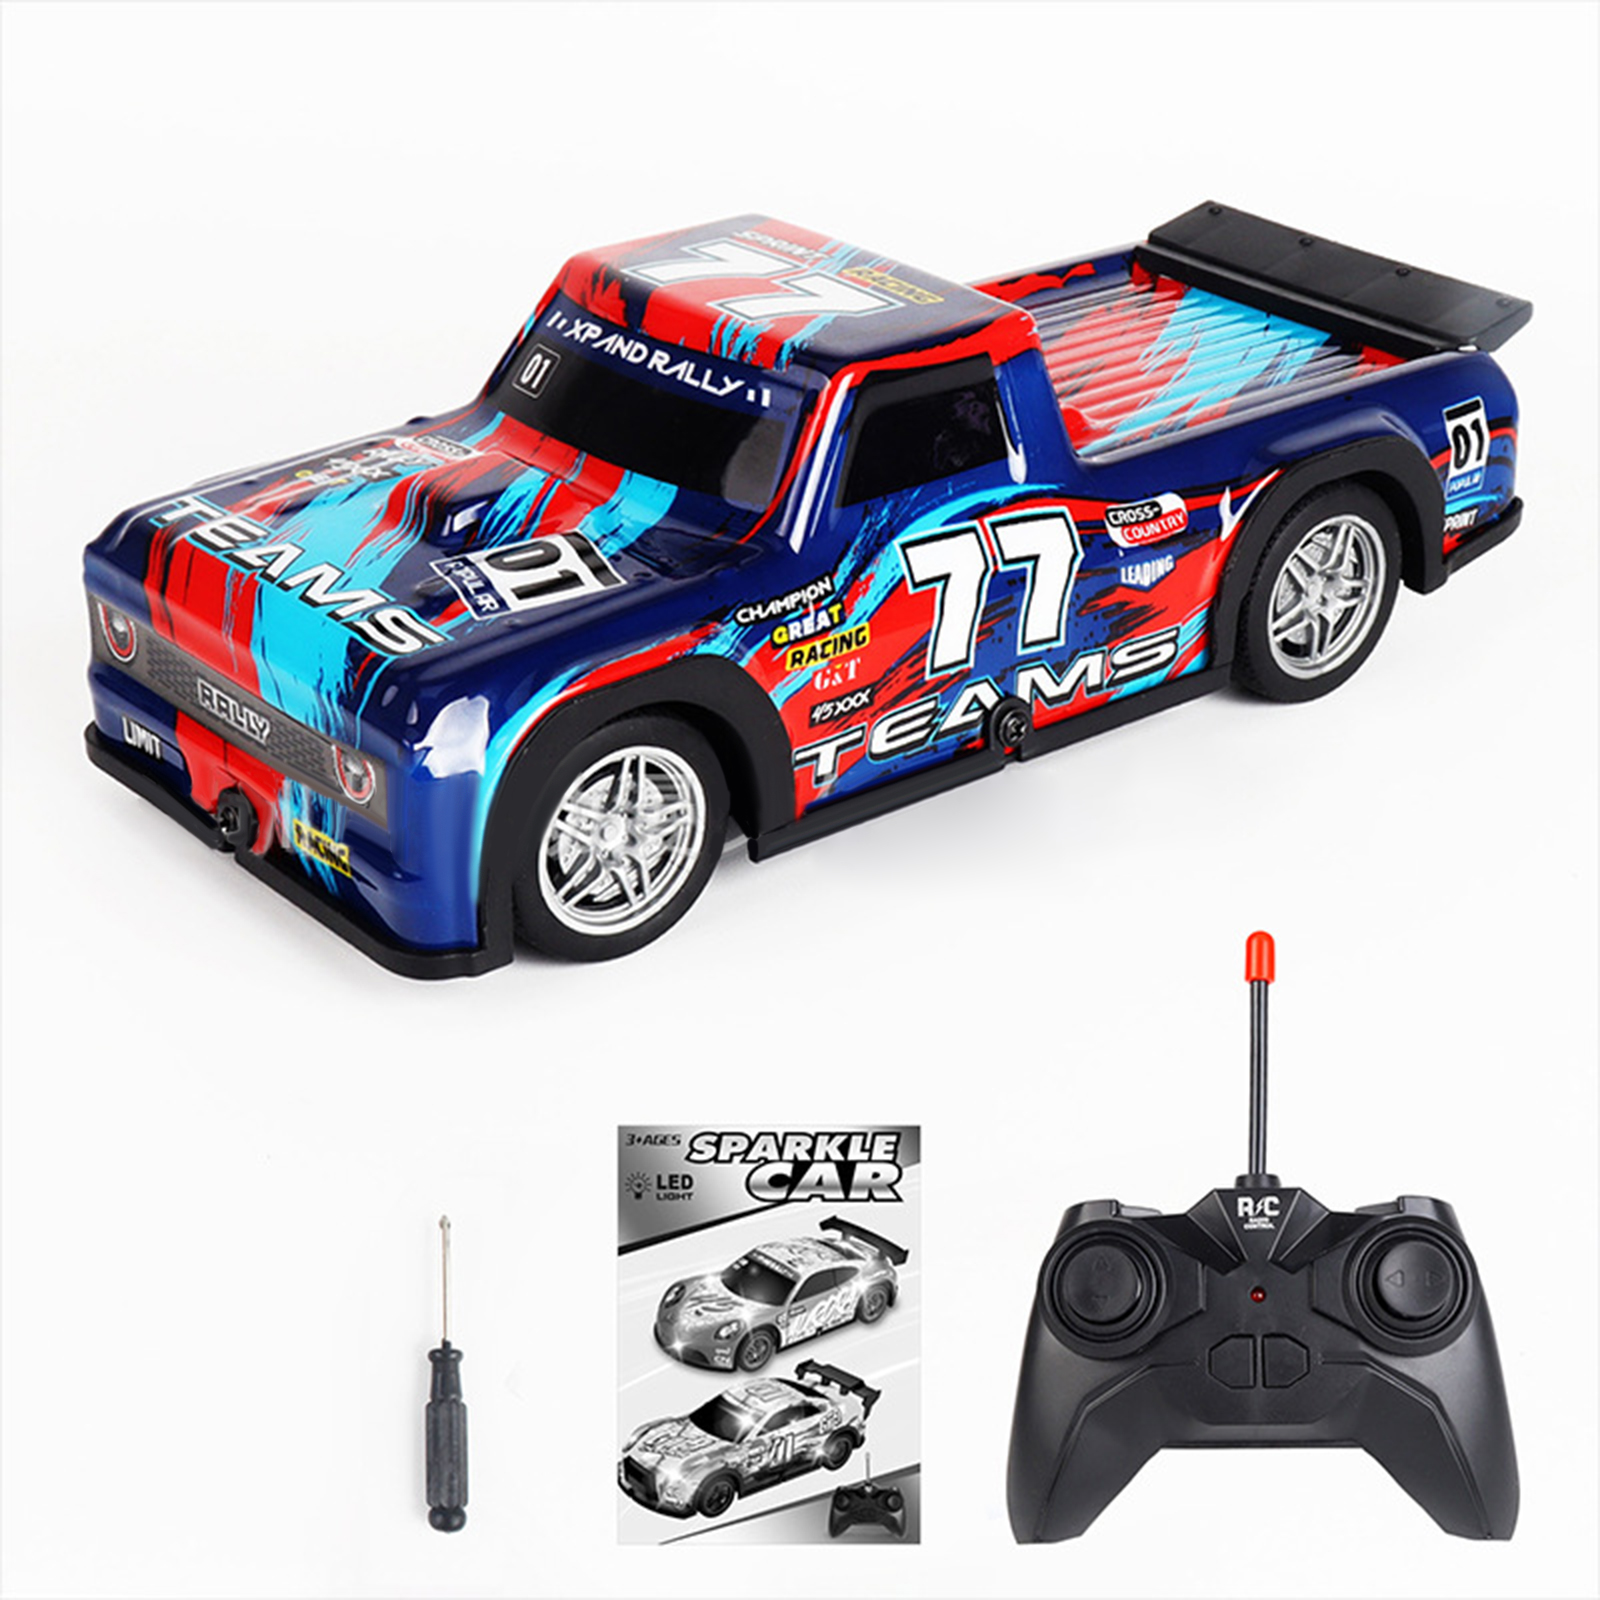 1:22 27HZ Remote Control Racing Car With LED Light 4-Channel Rc Drift Car Model Ornaments Birthday Gifts For Boys (Without Battery)